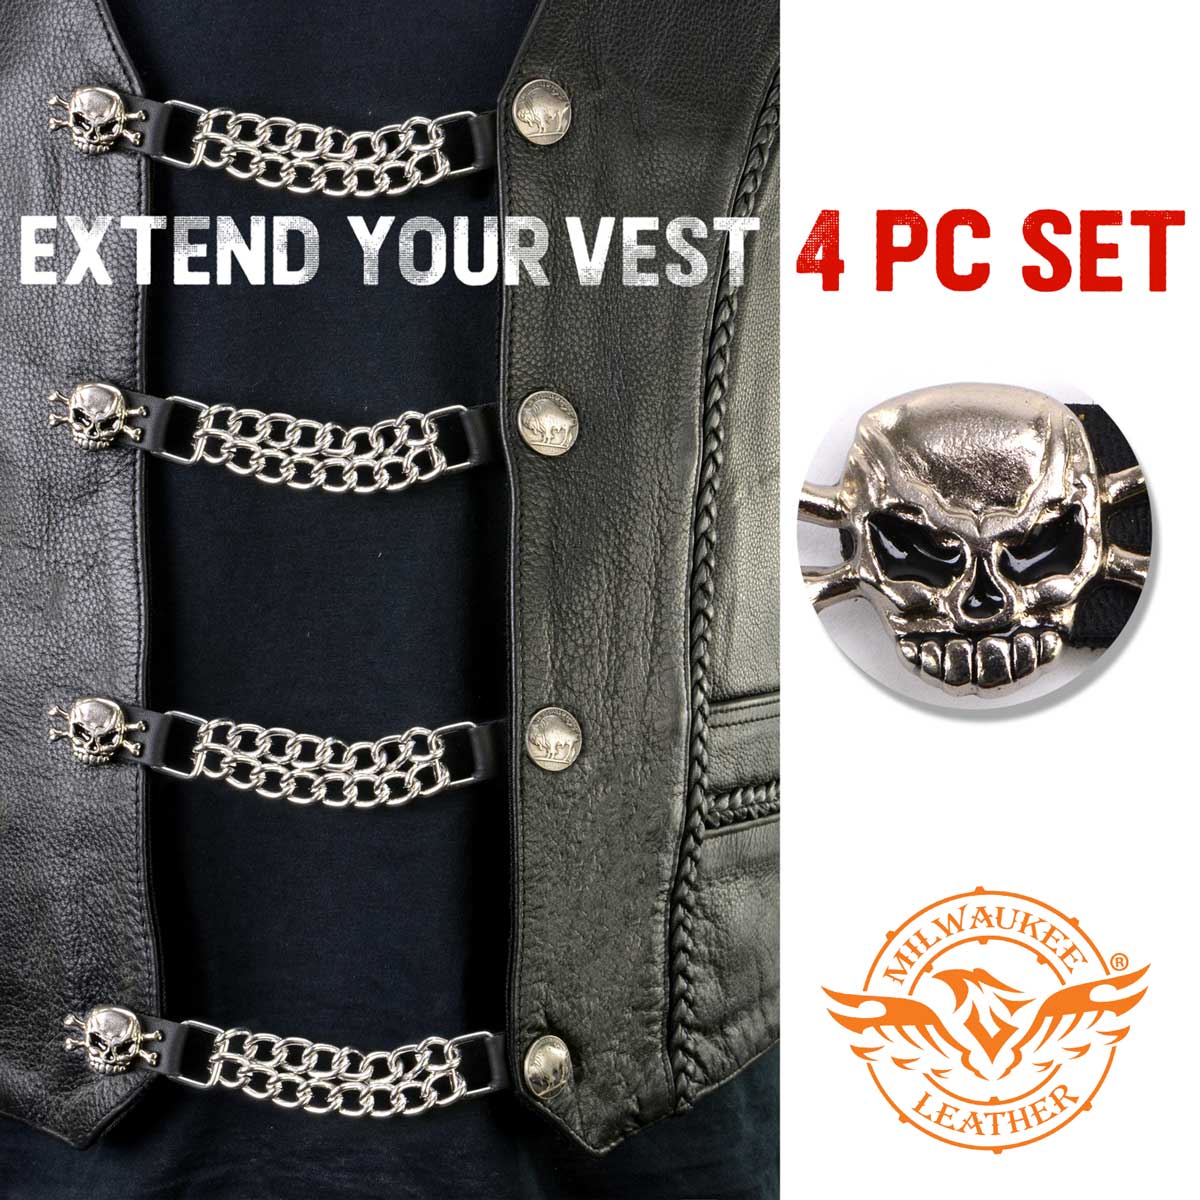 Milwaukee Leather MLA6041SET Skull and Cross Bones 4-PCS Vest Extender Double Chrome Chains w/ Genuine Leather 6" Extension